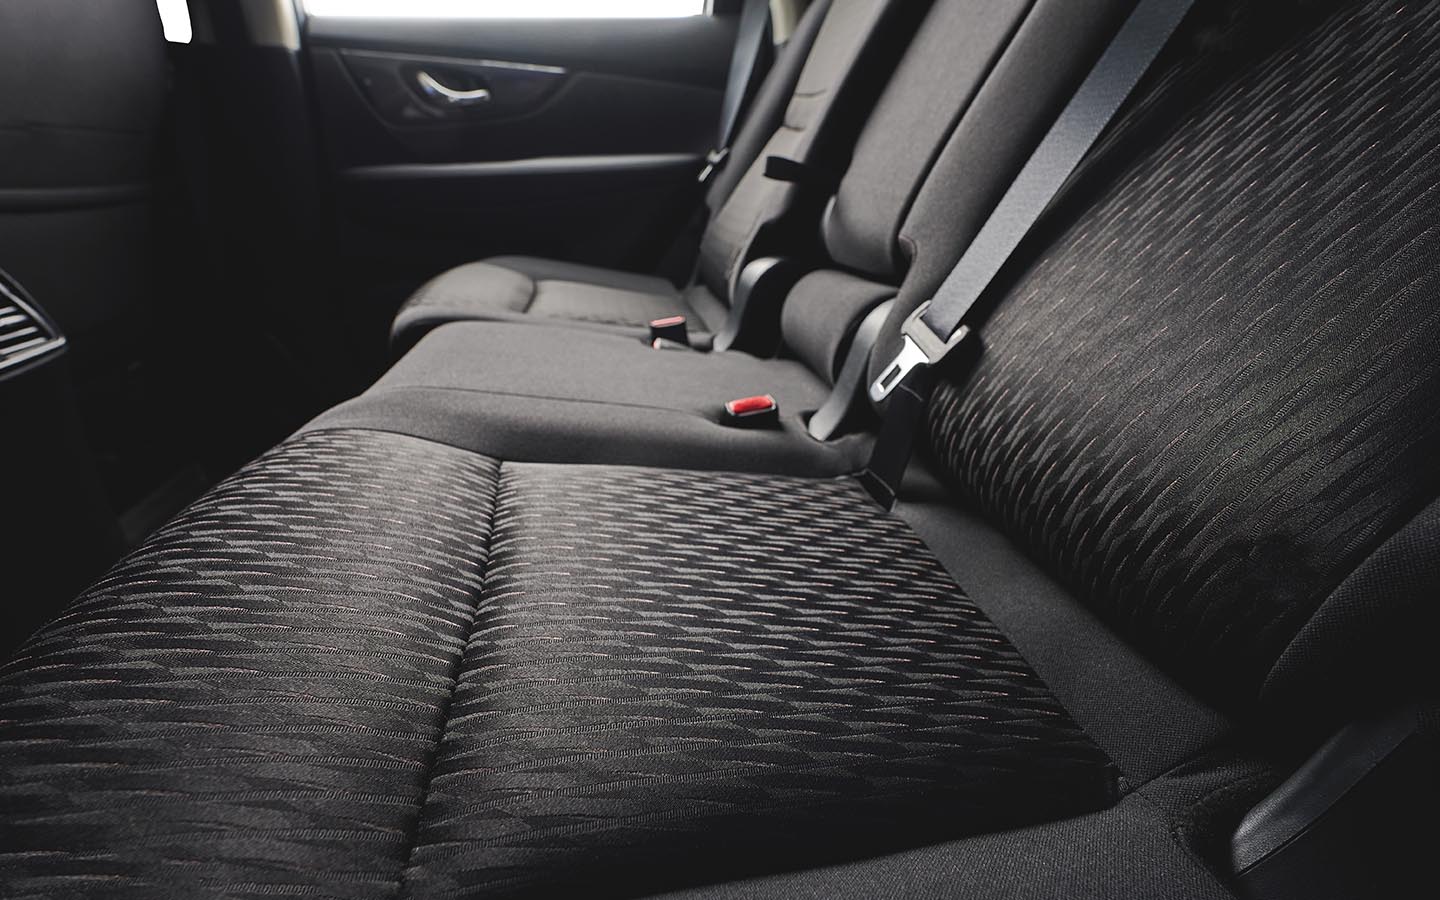 Cloth car upholstery is lighter and breathable than leather